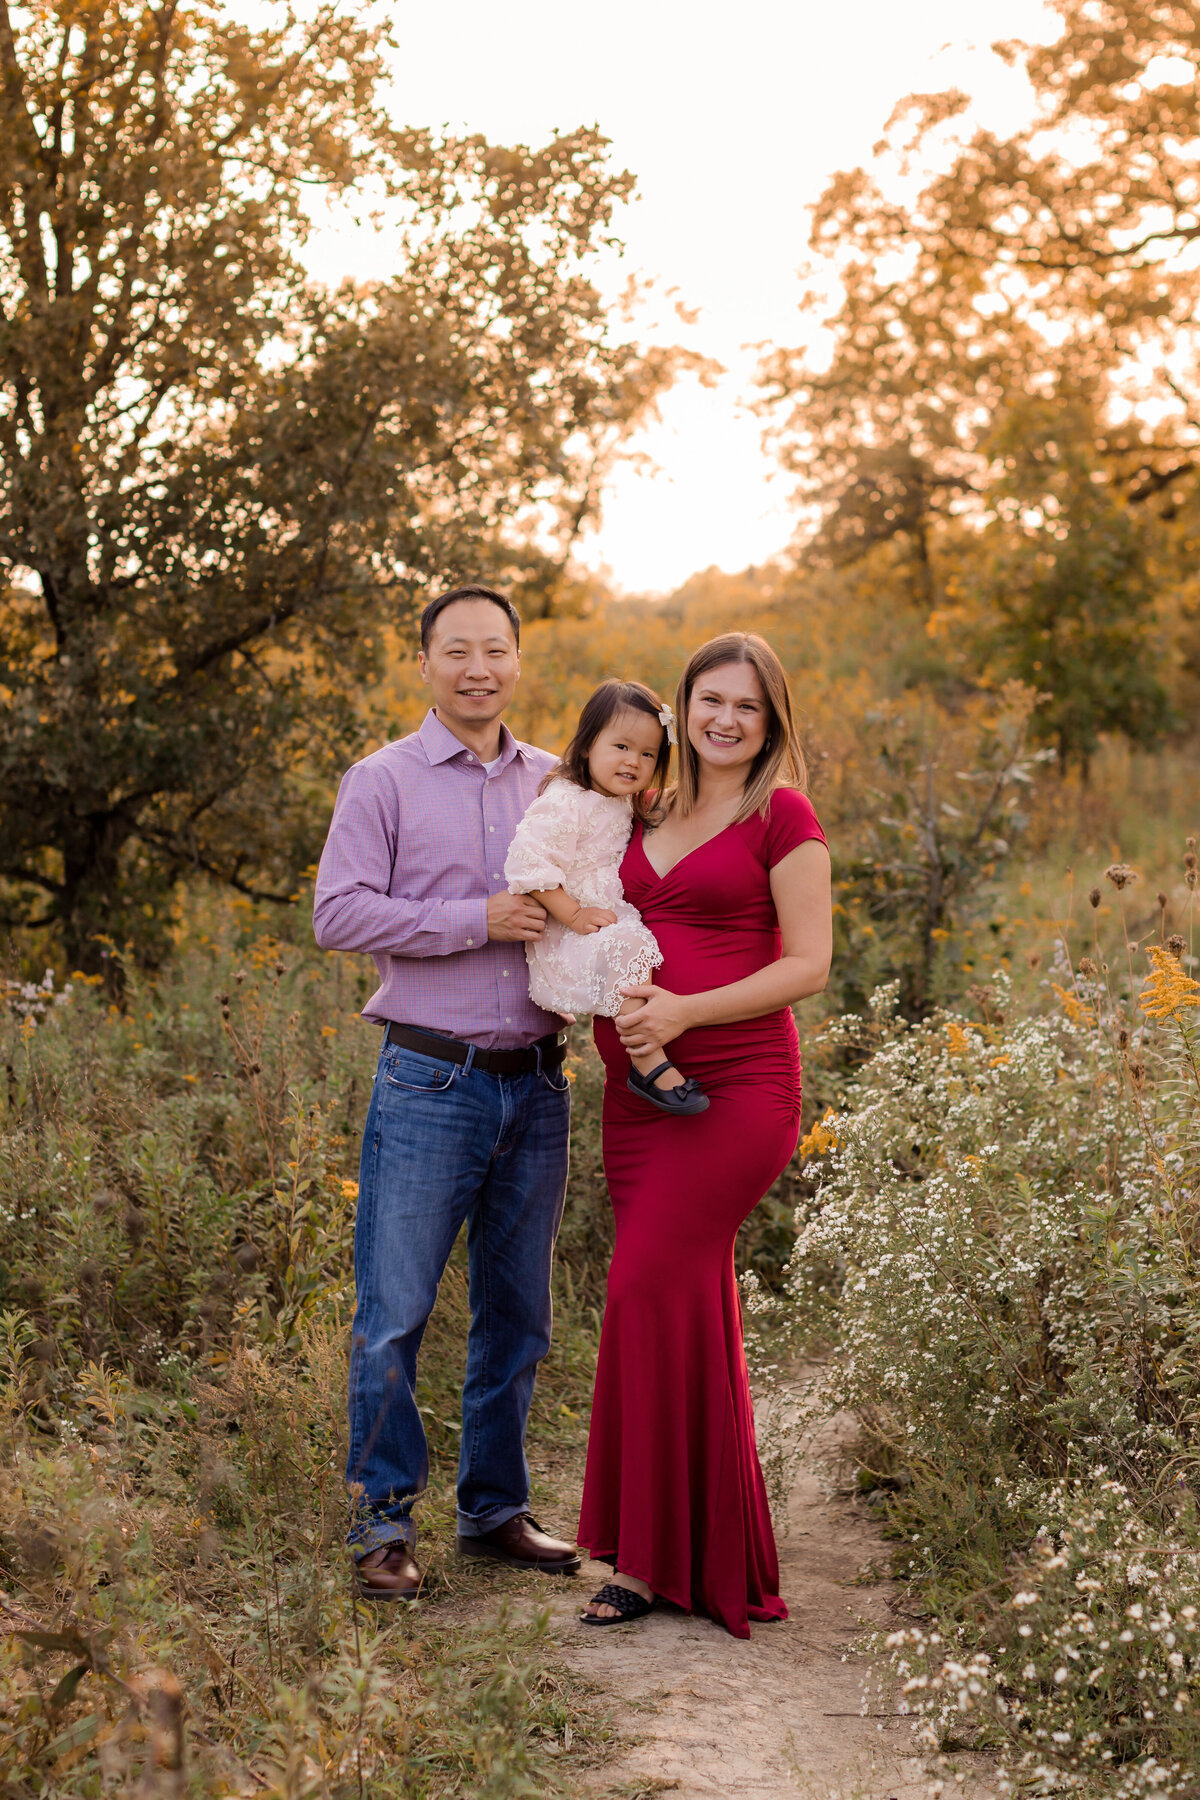 A glowing pregnant mom portrait with her family in a field of flowers.